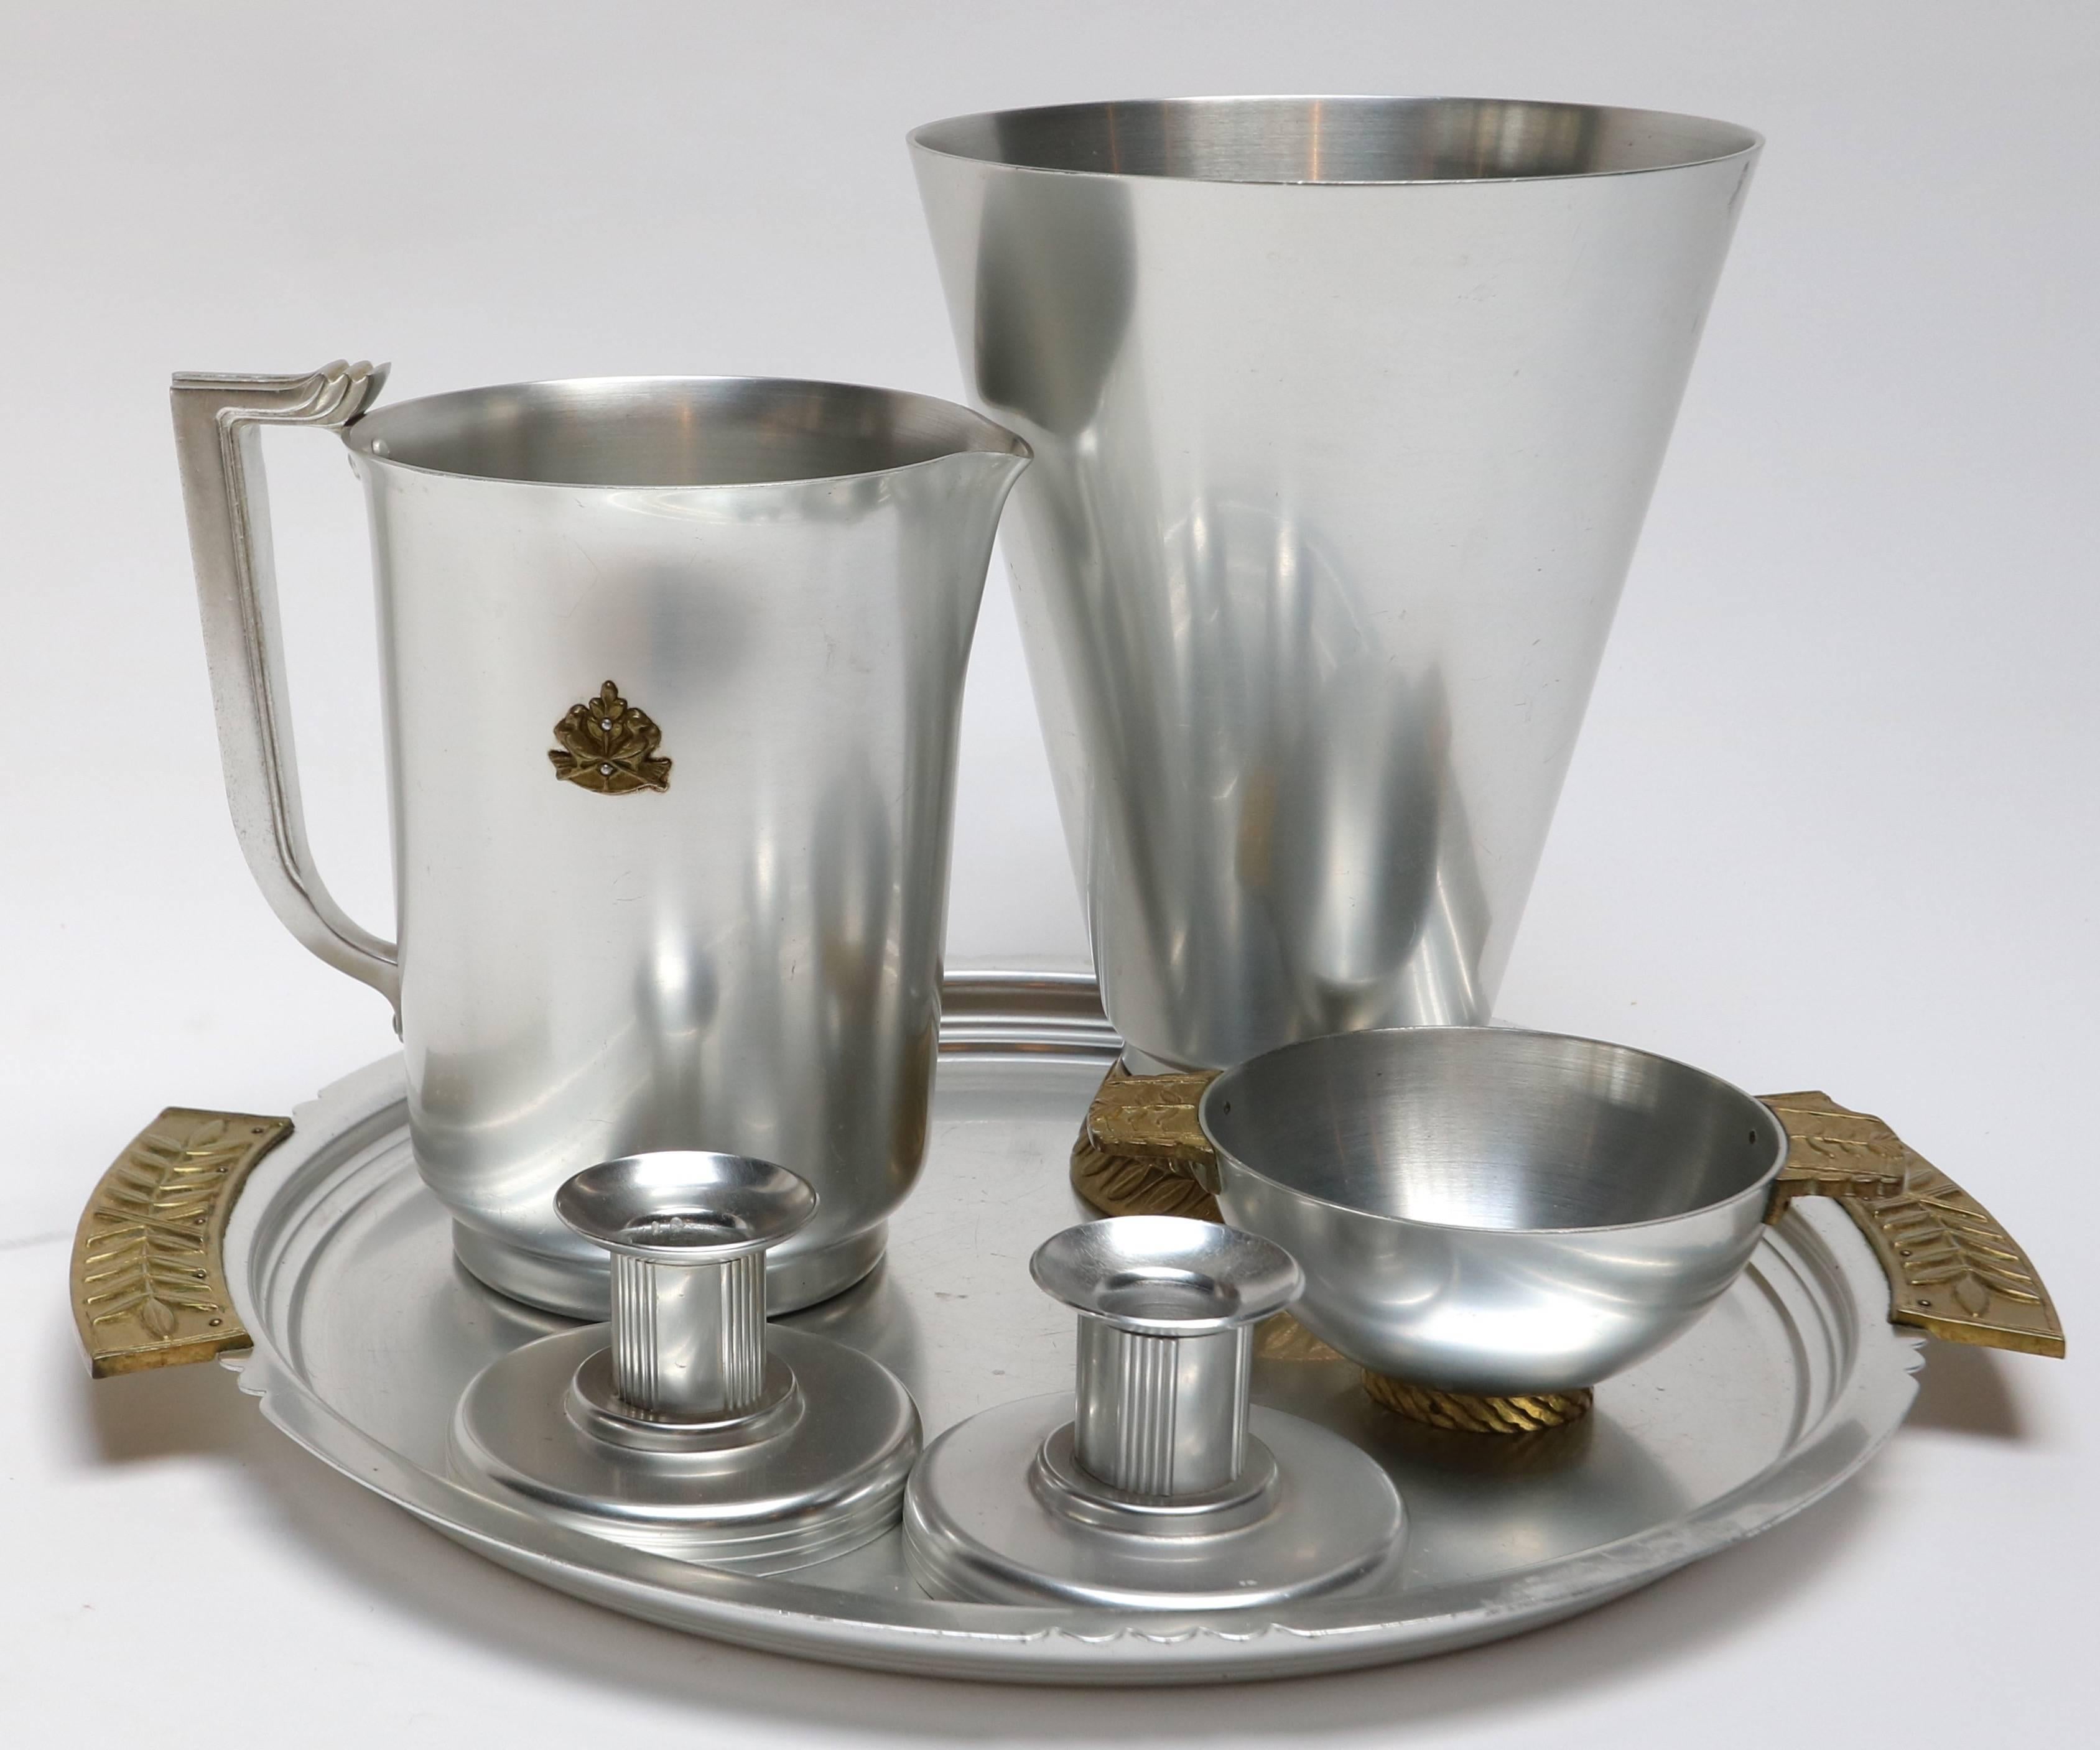 Aluminium and brass pieces table accessories by Kensington, including vase (H x D = 10